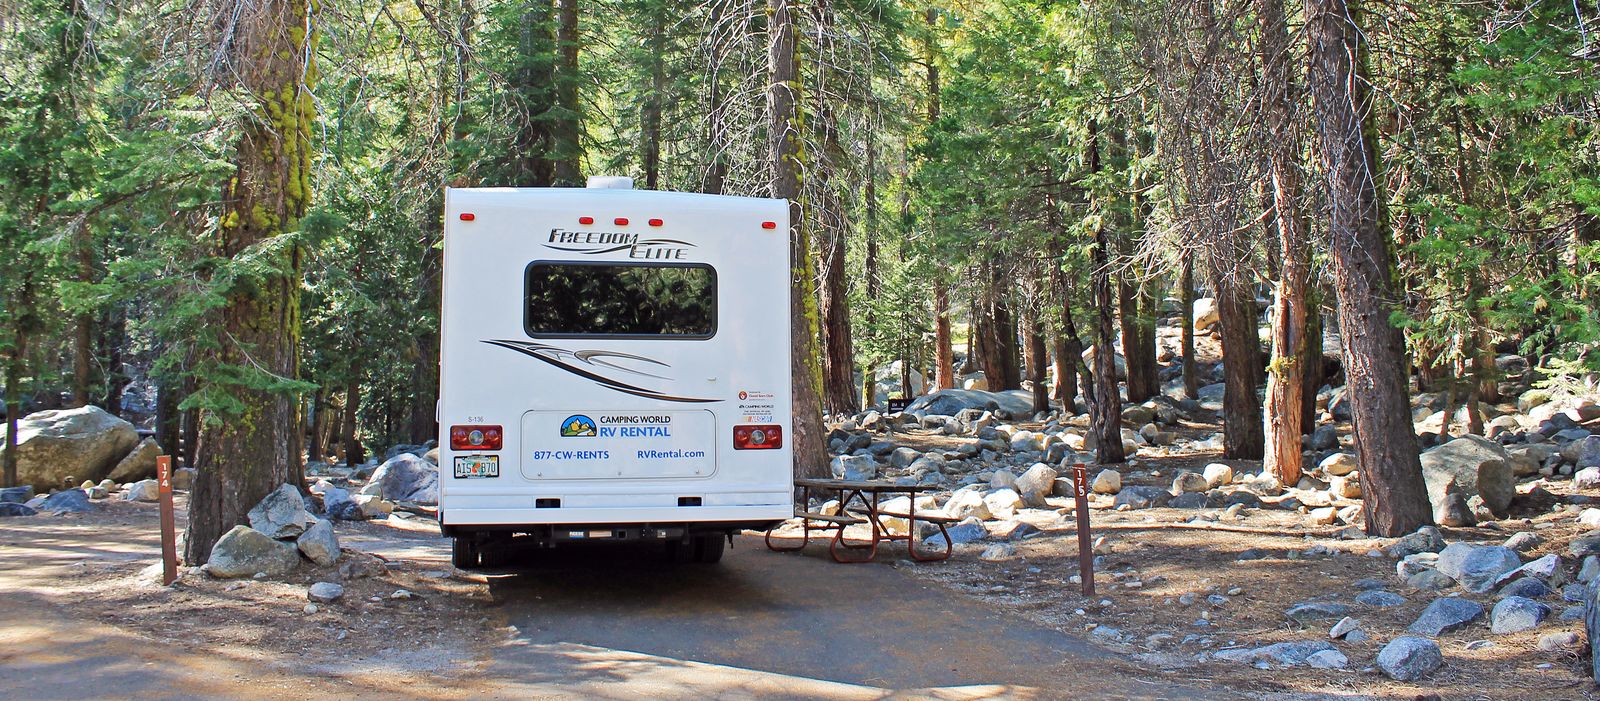 Lodgepole Campground